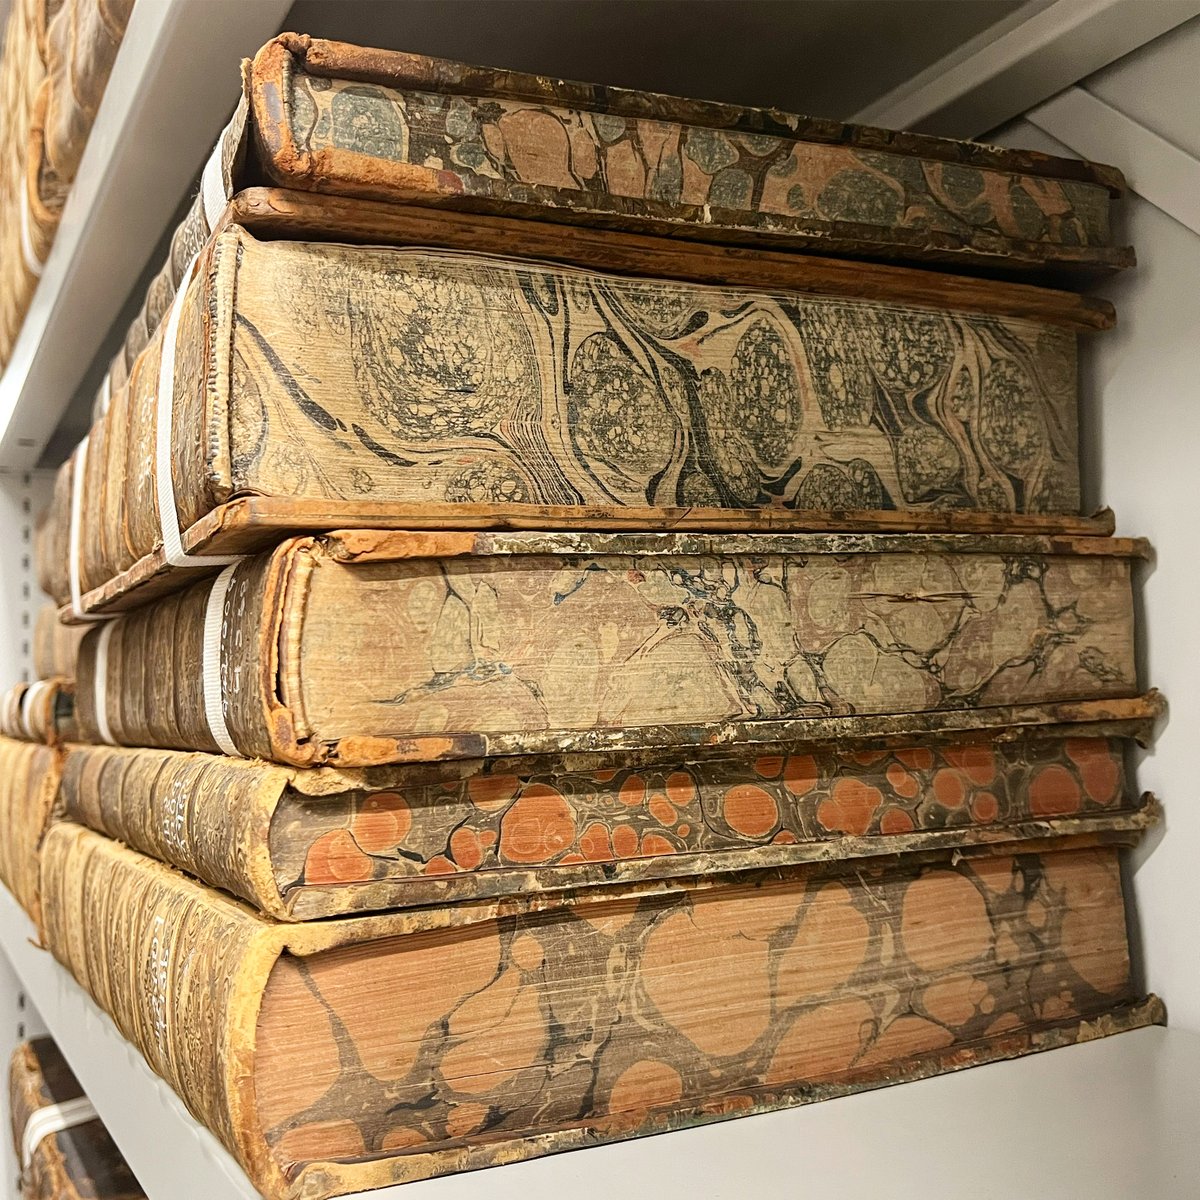 Wishing you all a wonderful #MarbledMonday from our stacks! 

Marbling is a process of floating ink on water thickened with seaweed, leaving a one-of-a-kind design,  which became incredibly popular for book endpapers and fore-edges!